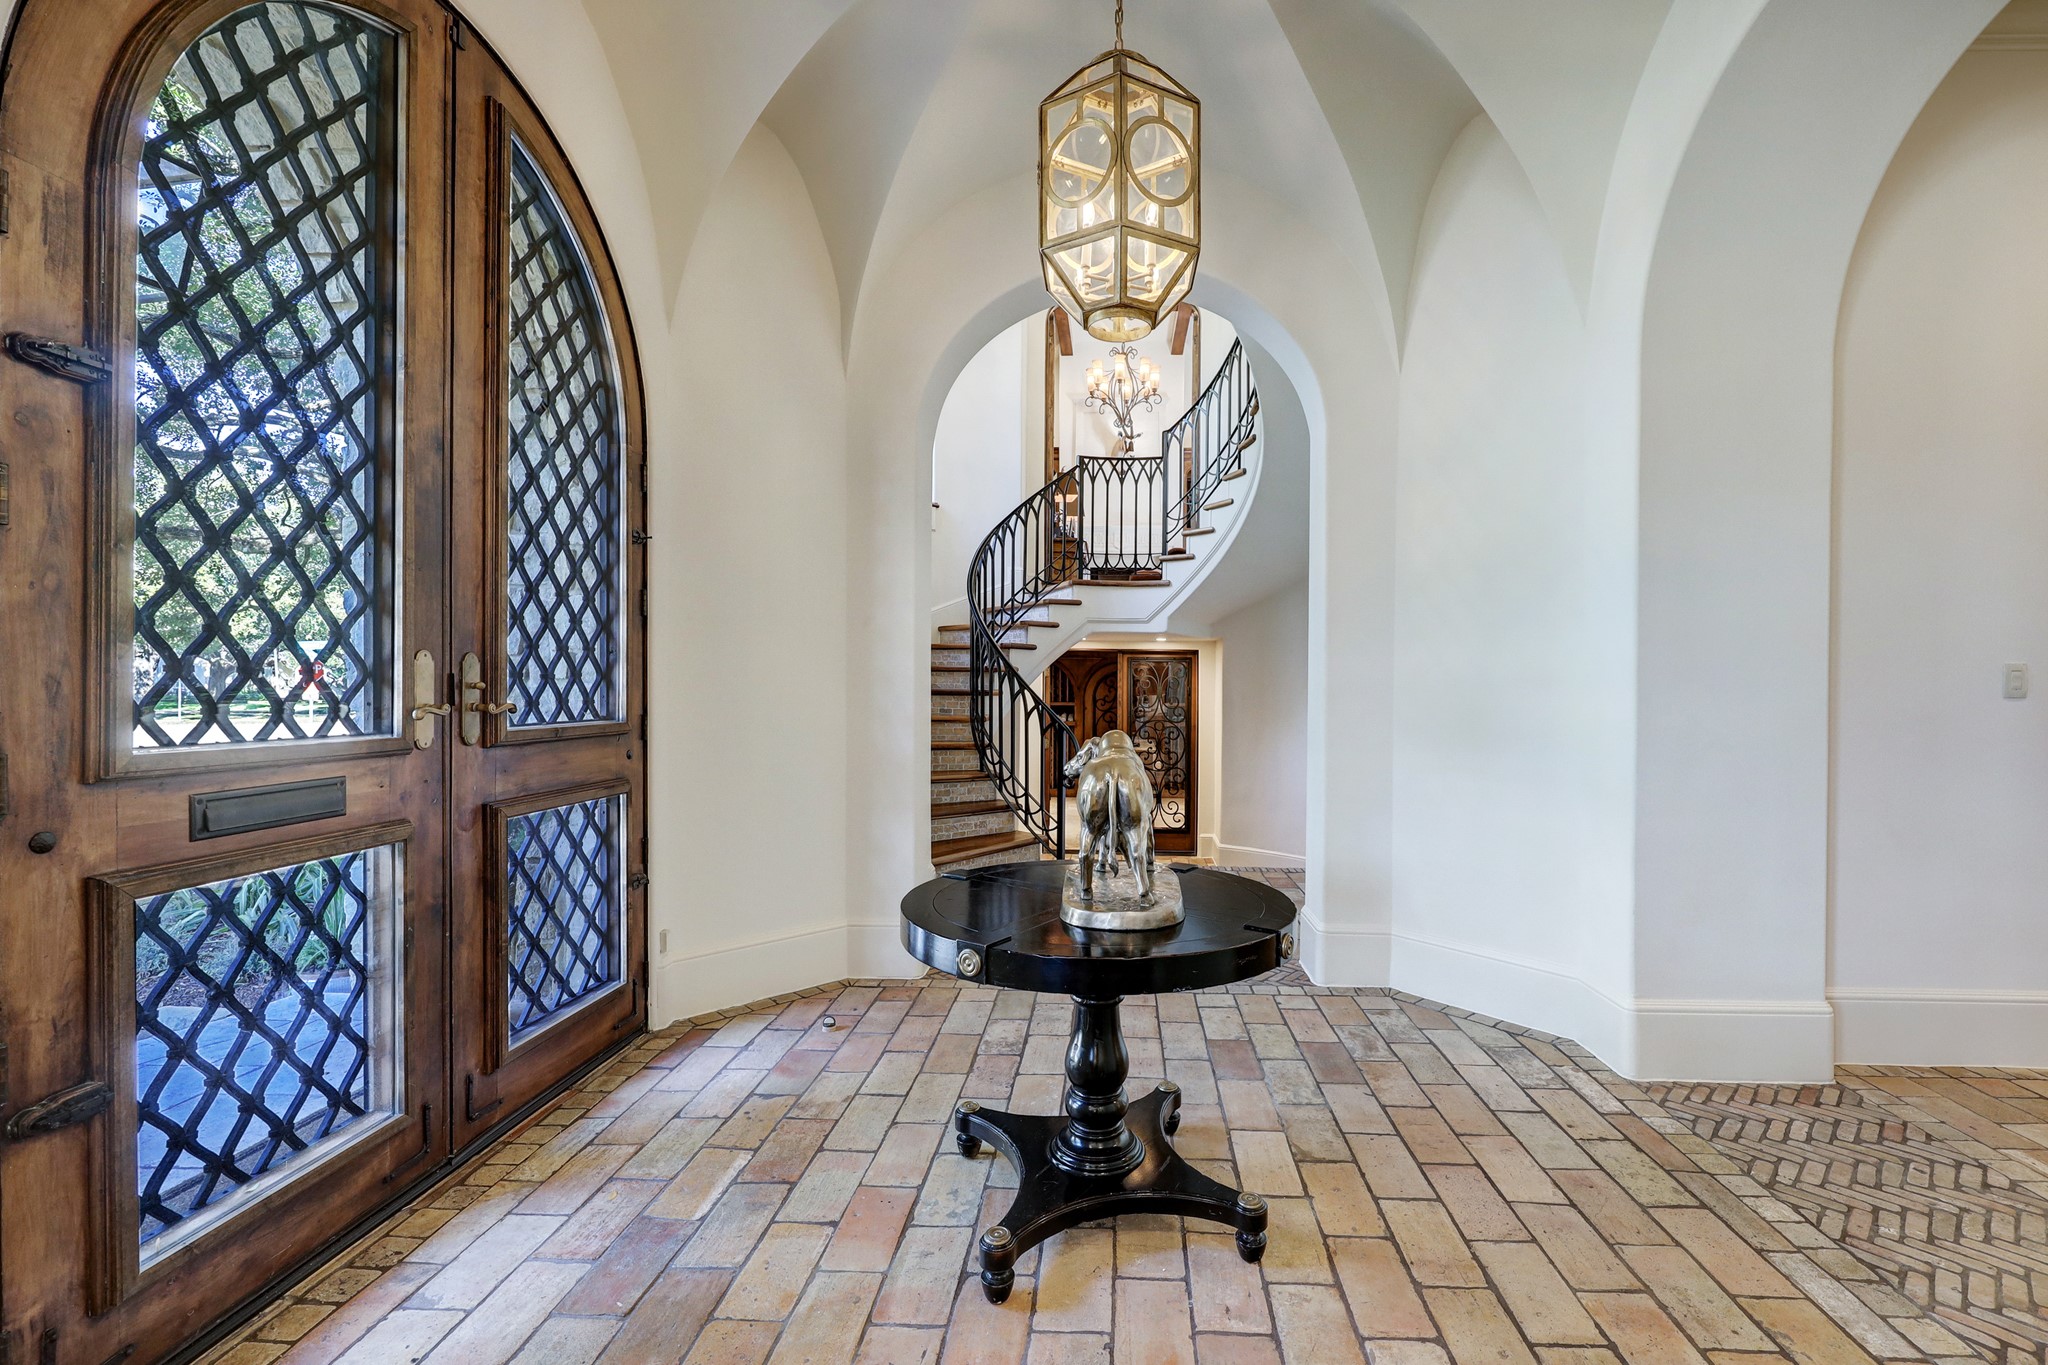 The main stairwell serves as a focal point and provides convenient access to the study and upstairs gallery. The stairwell is adorned with clerestory windows, which allow natural light to flood the space, creating a bright and welcoming atmosphere.